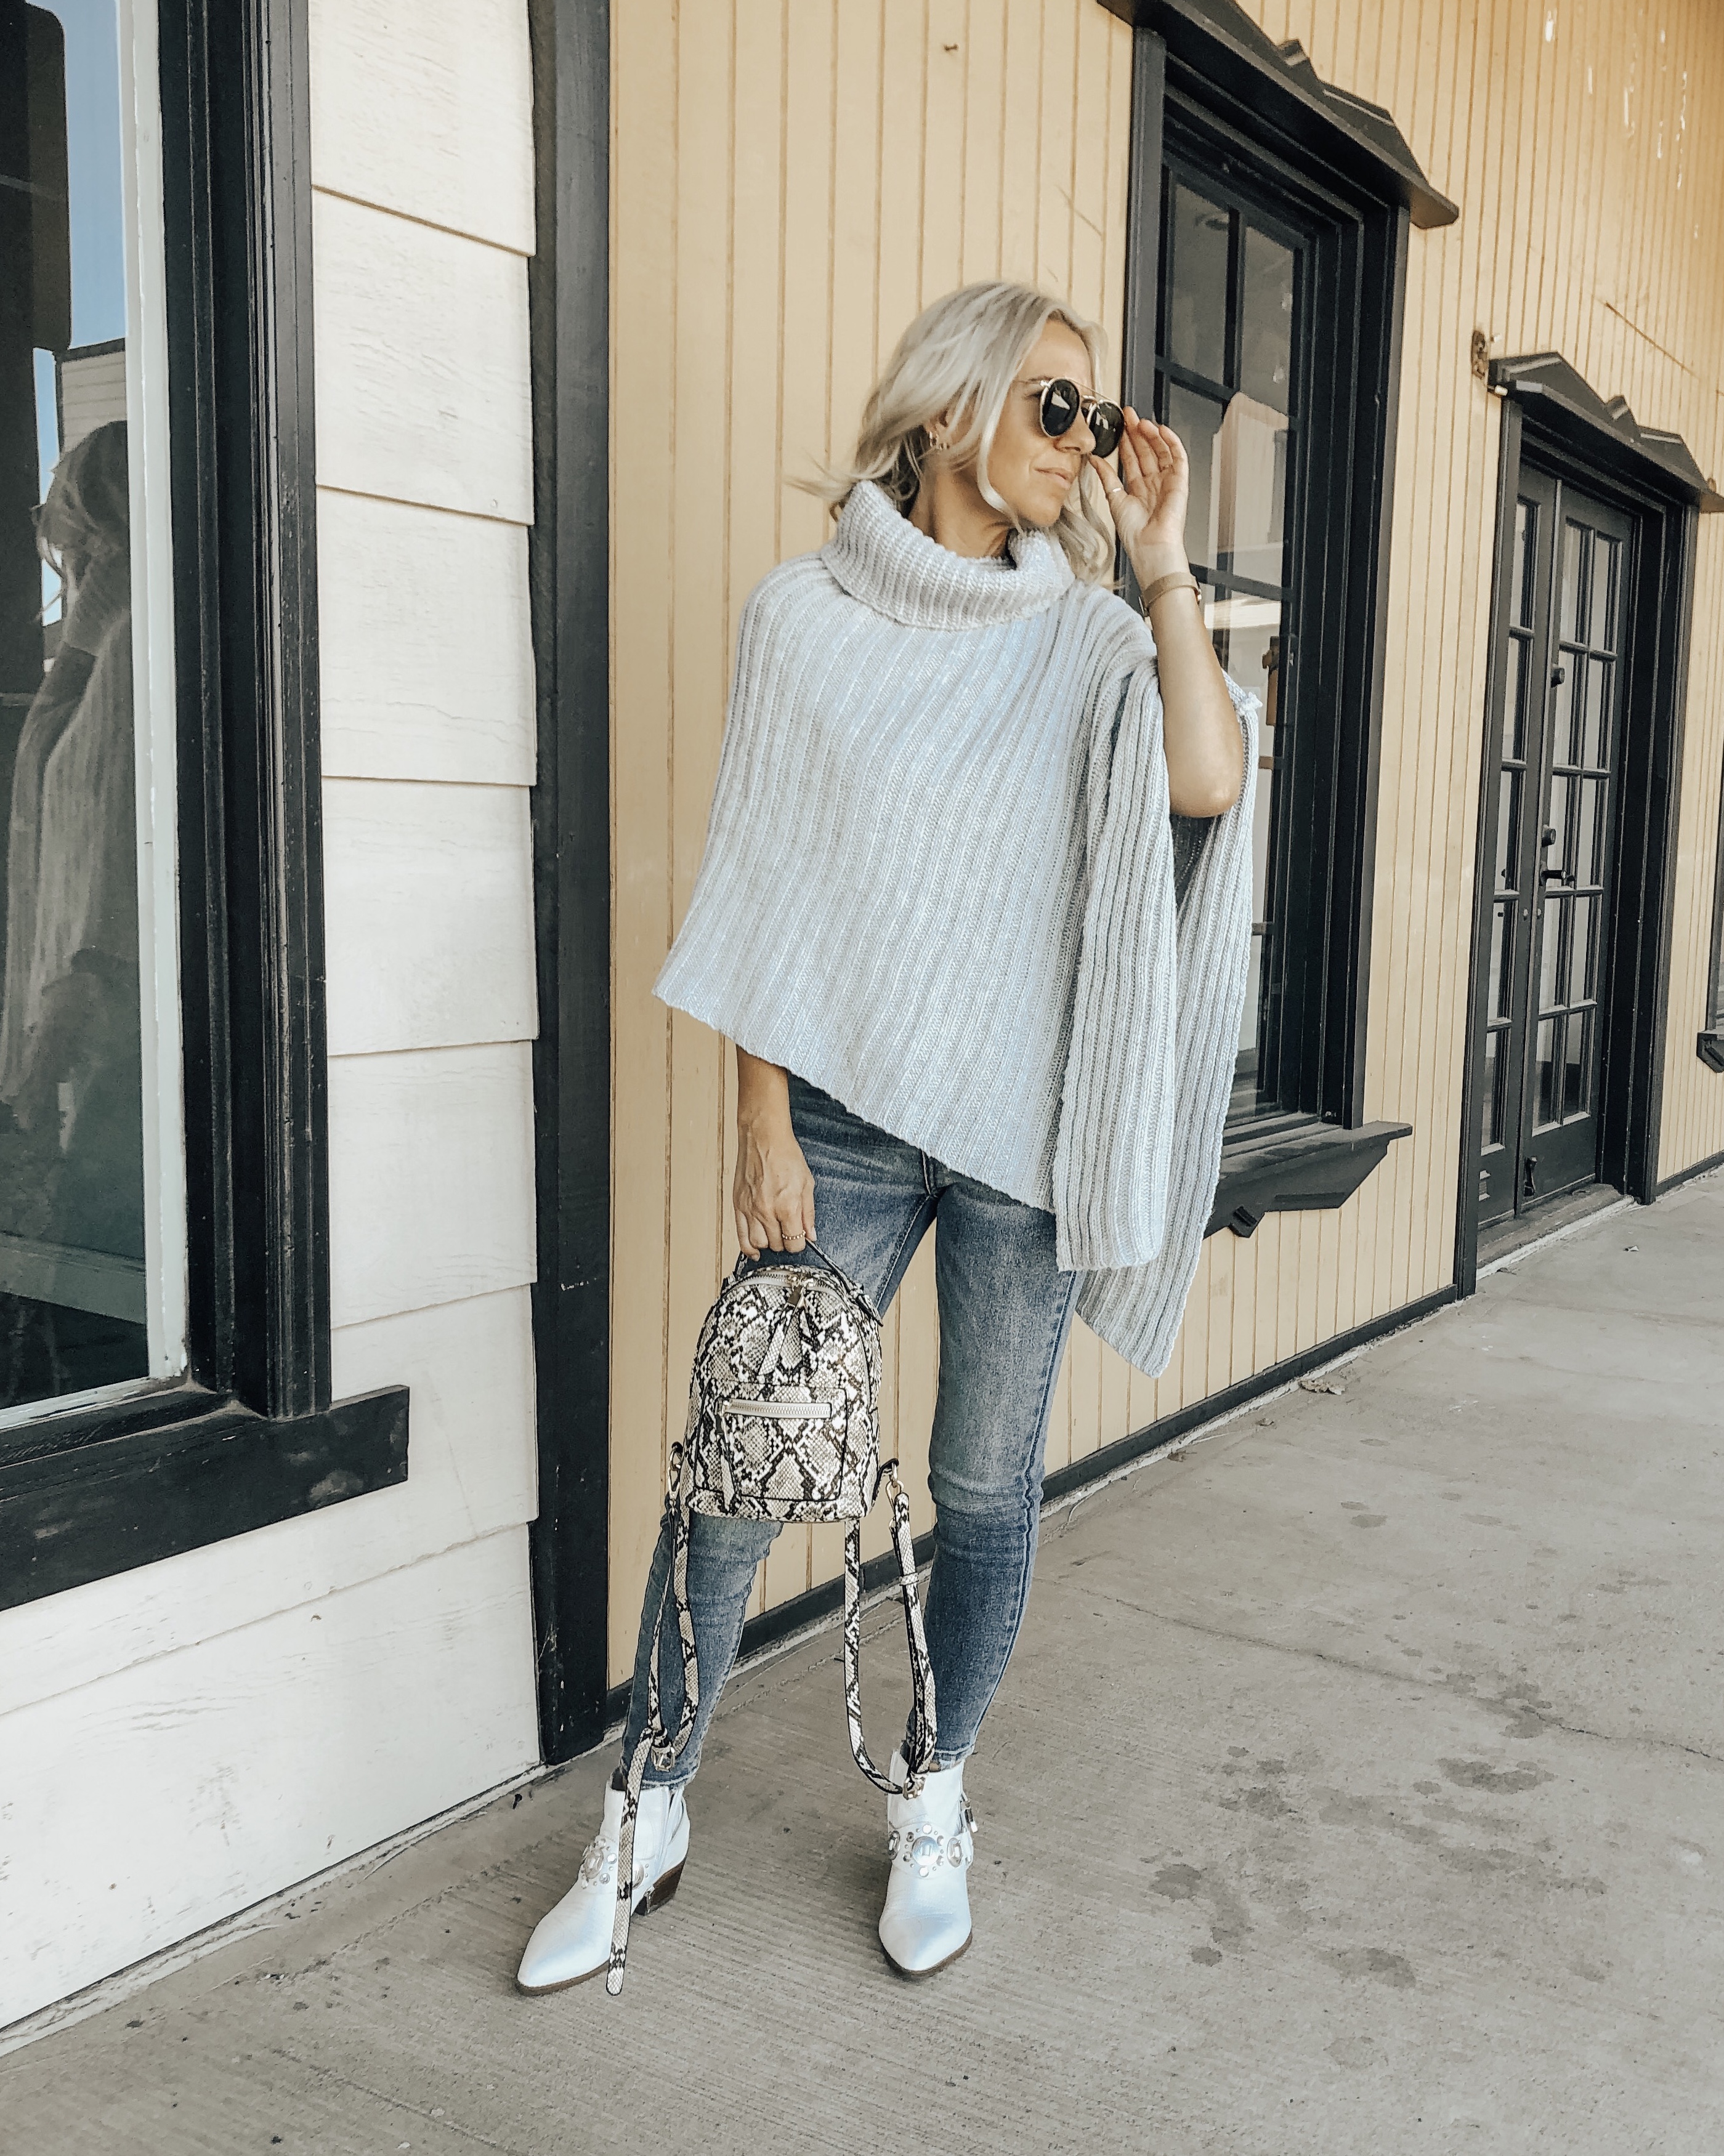 TREND ALERT: THE PONCHO SWEATER- Jaclyn De Leon Style + the poncho sweater trend is back in a big way! It's comfy + cozy and the perfect piece to throw over a top and jeans to completely update your look. This Amazon find is a must- have piece